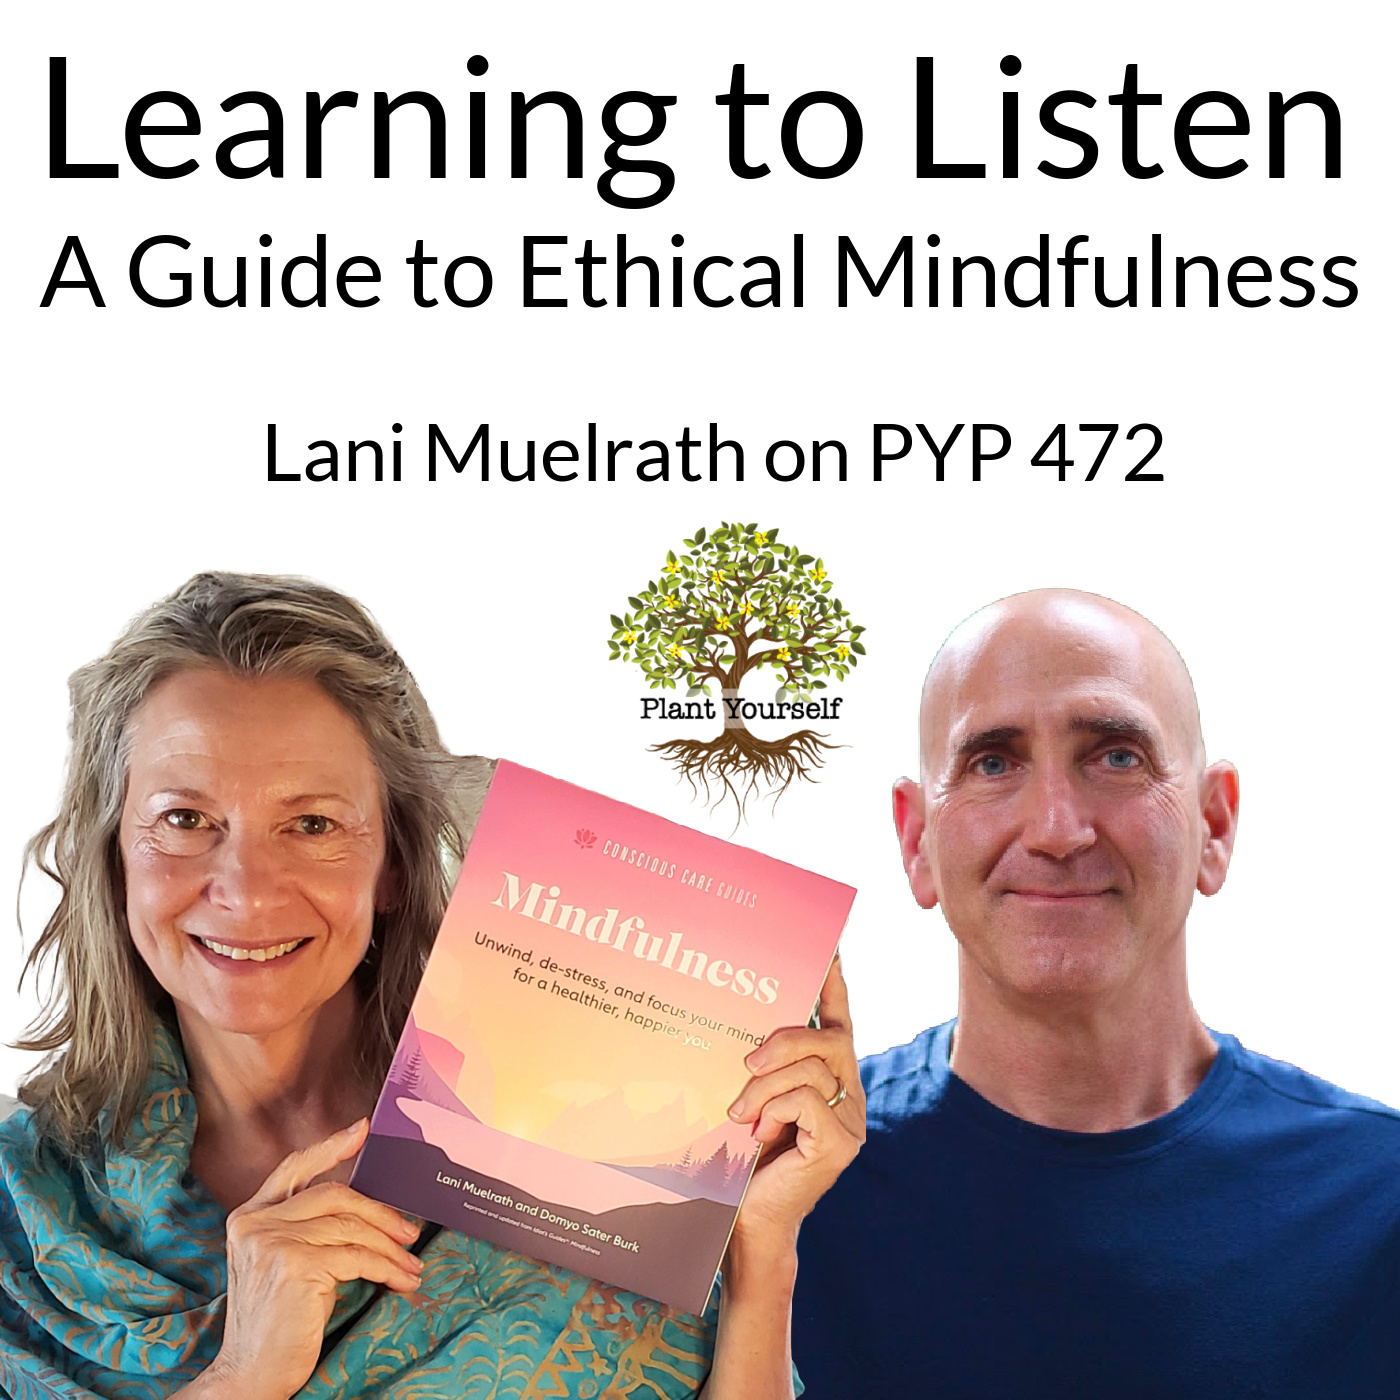 Learning to Listen: A Guide to Ethical Mindfulness: Lani Muelrath on PYP 472